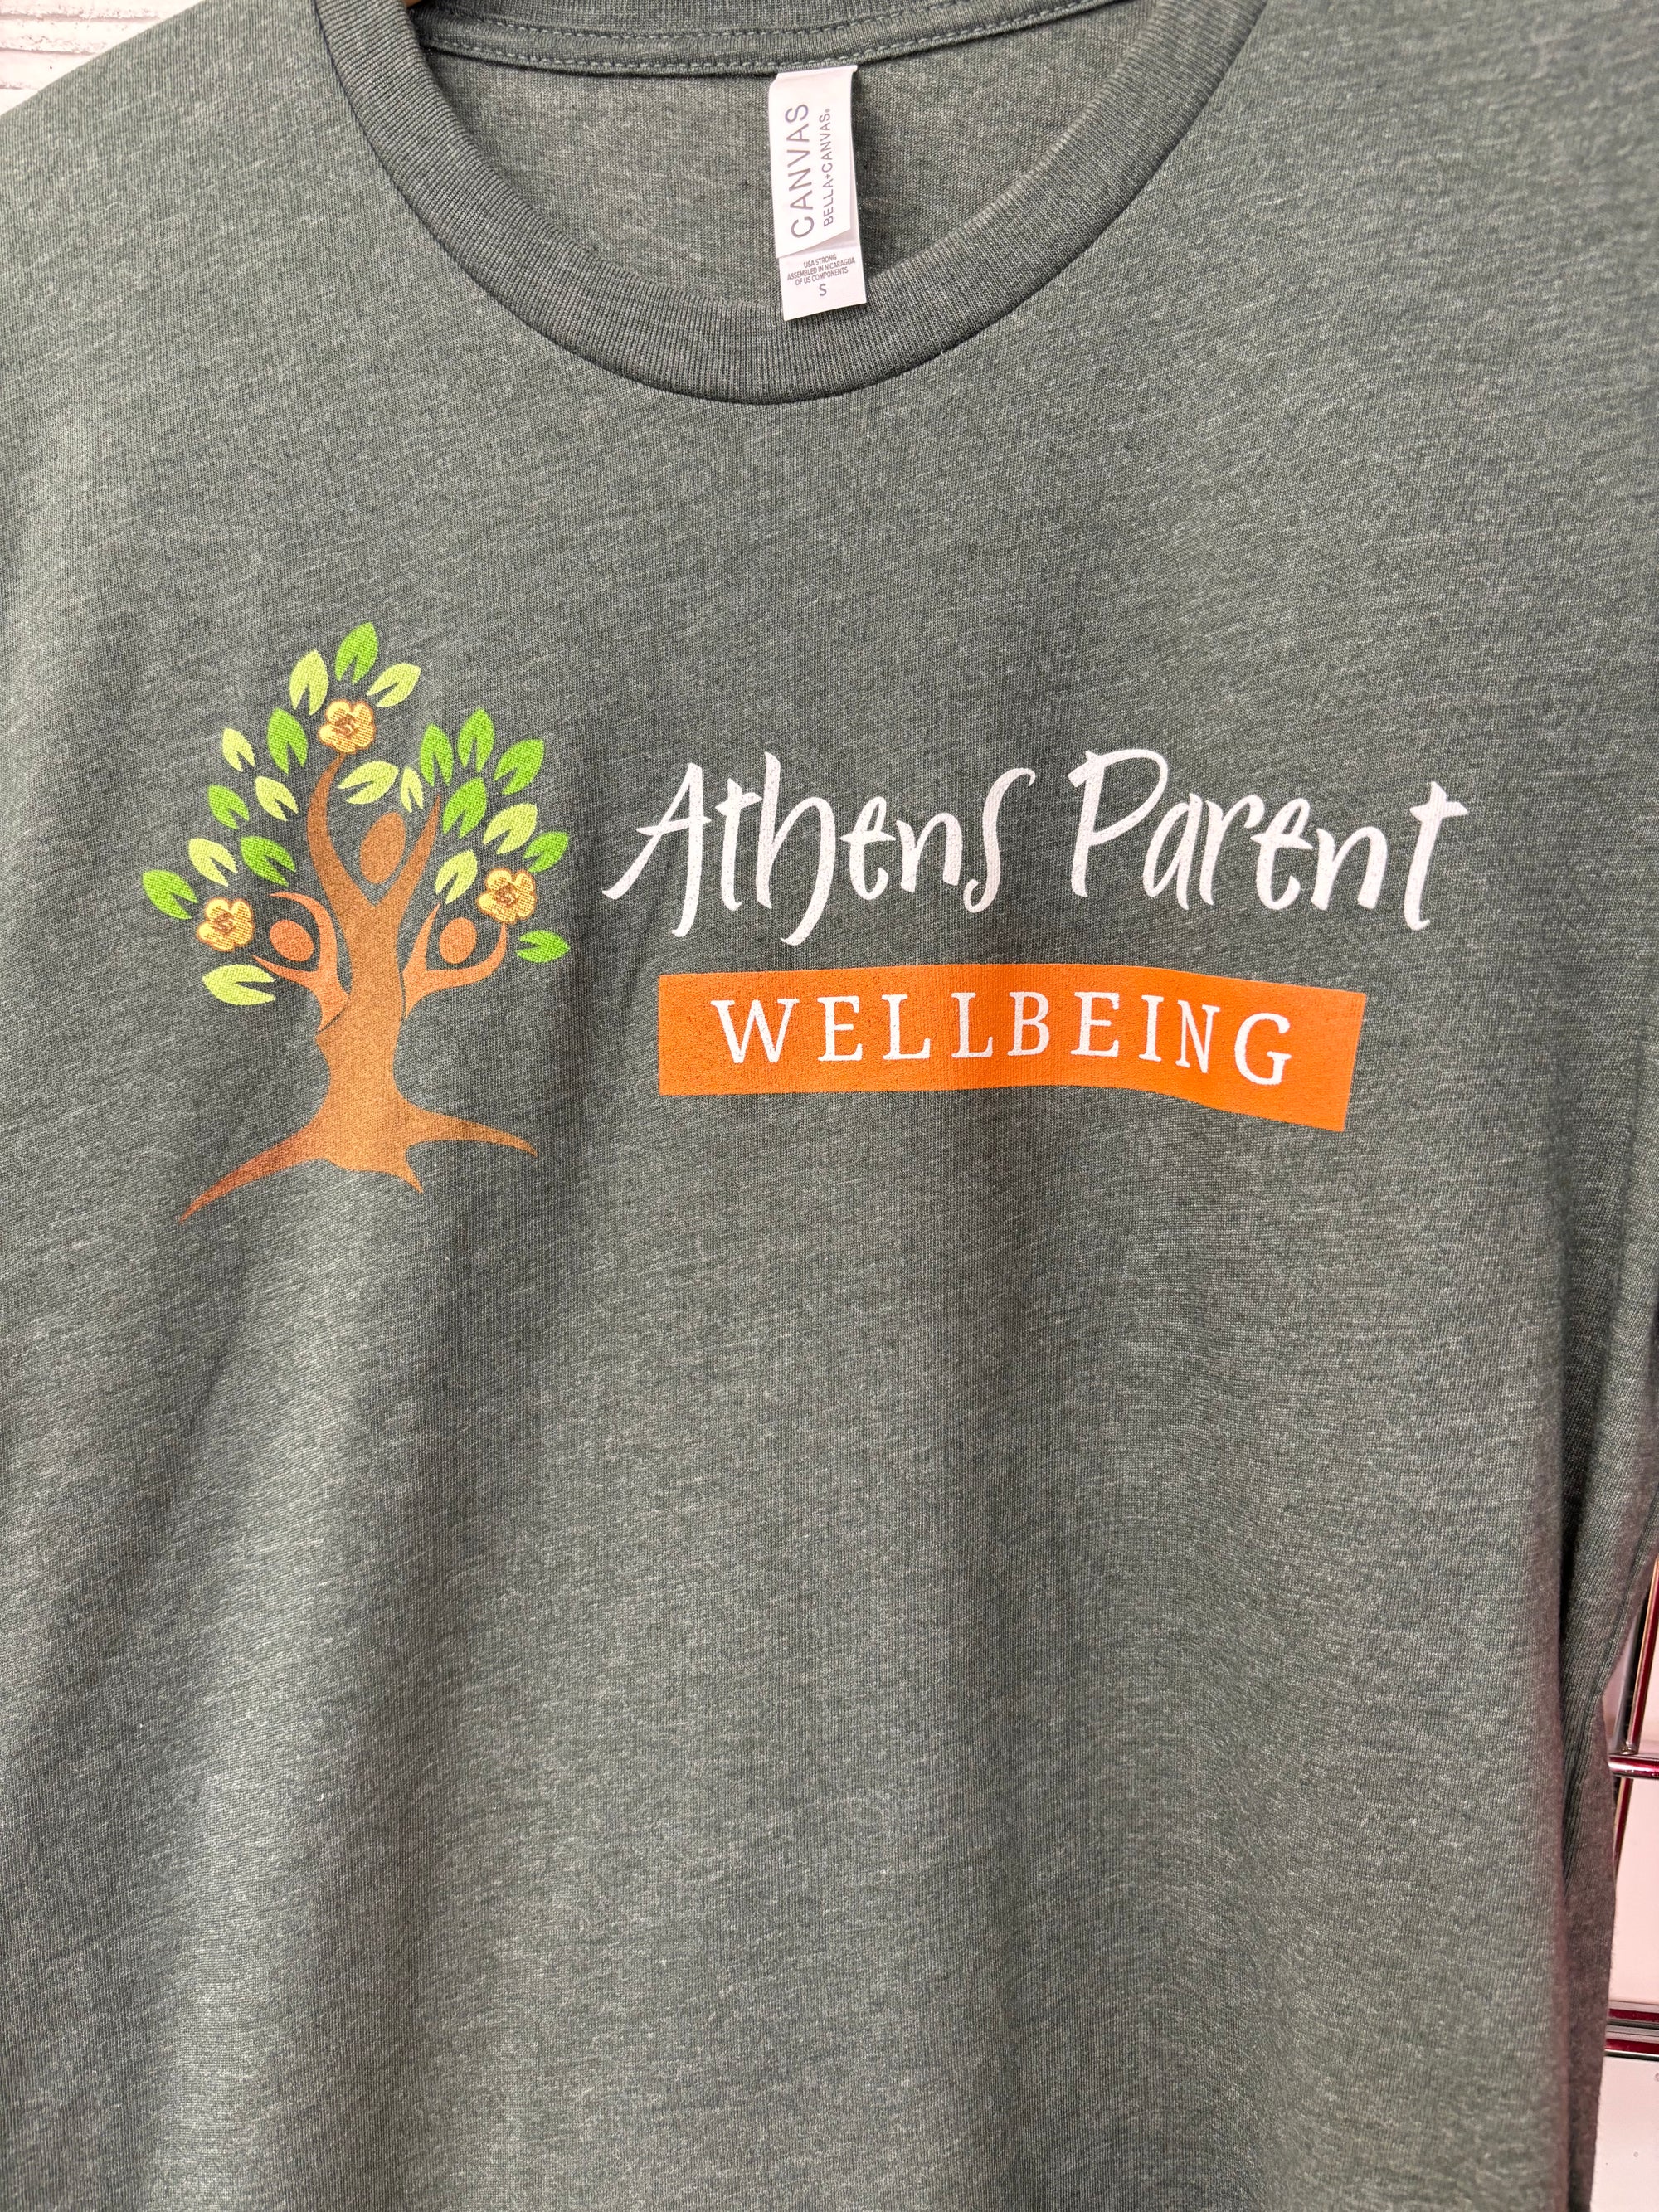 Athens Parent Wellbeing T Shirt